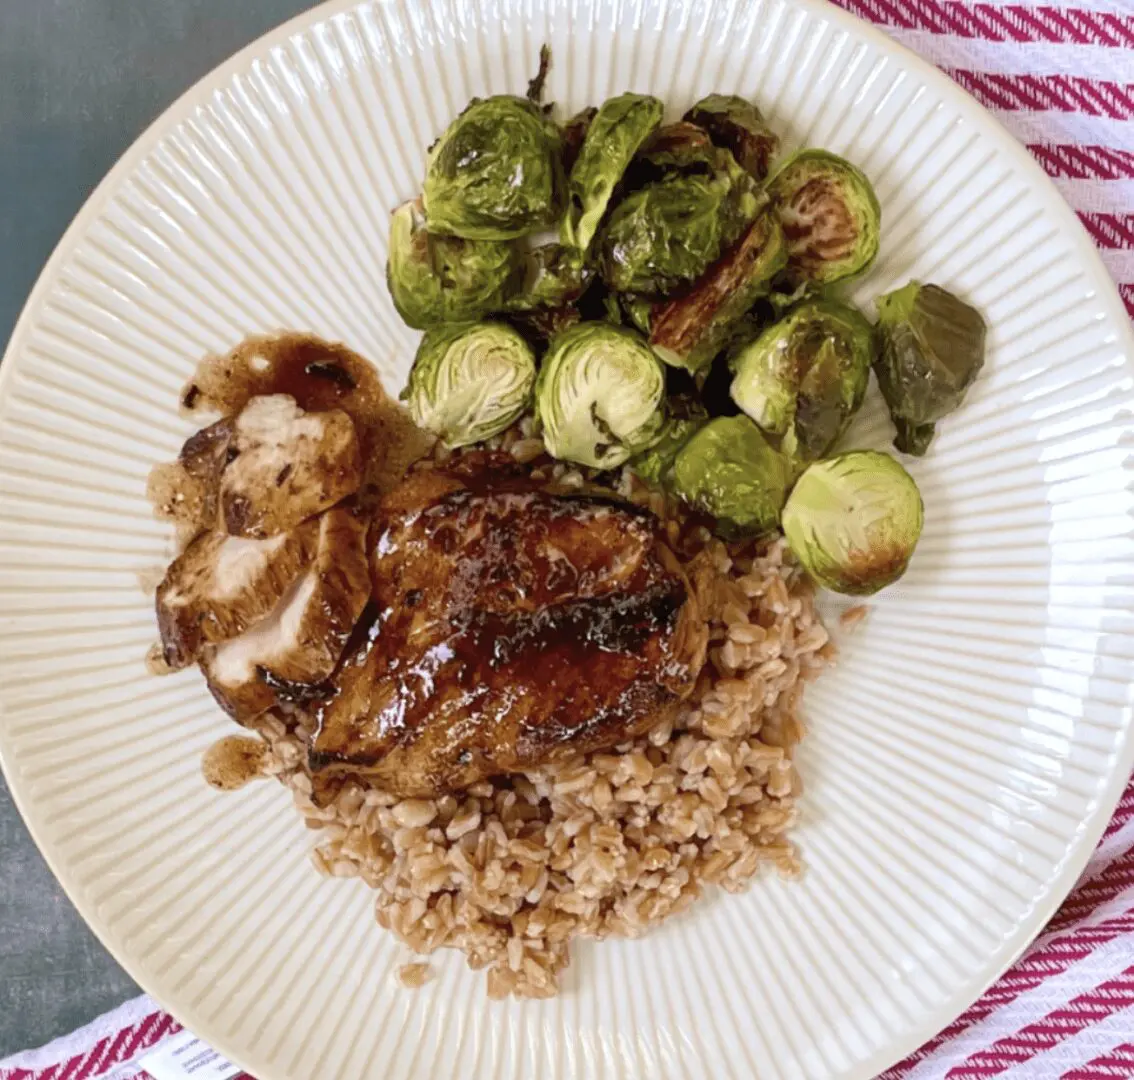 A plate with chicken, brussels sprouts and rice.